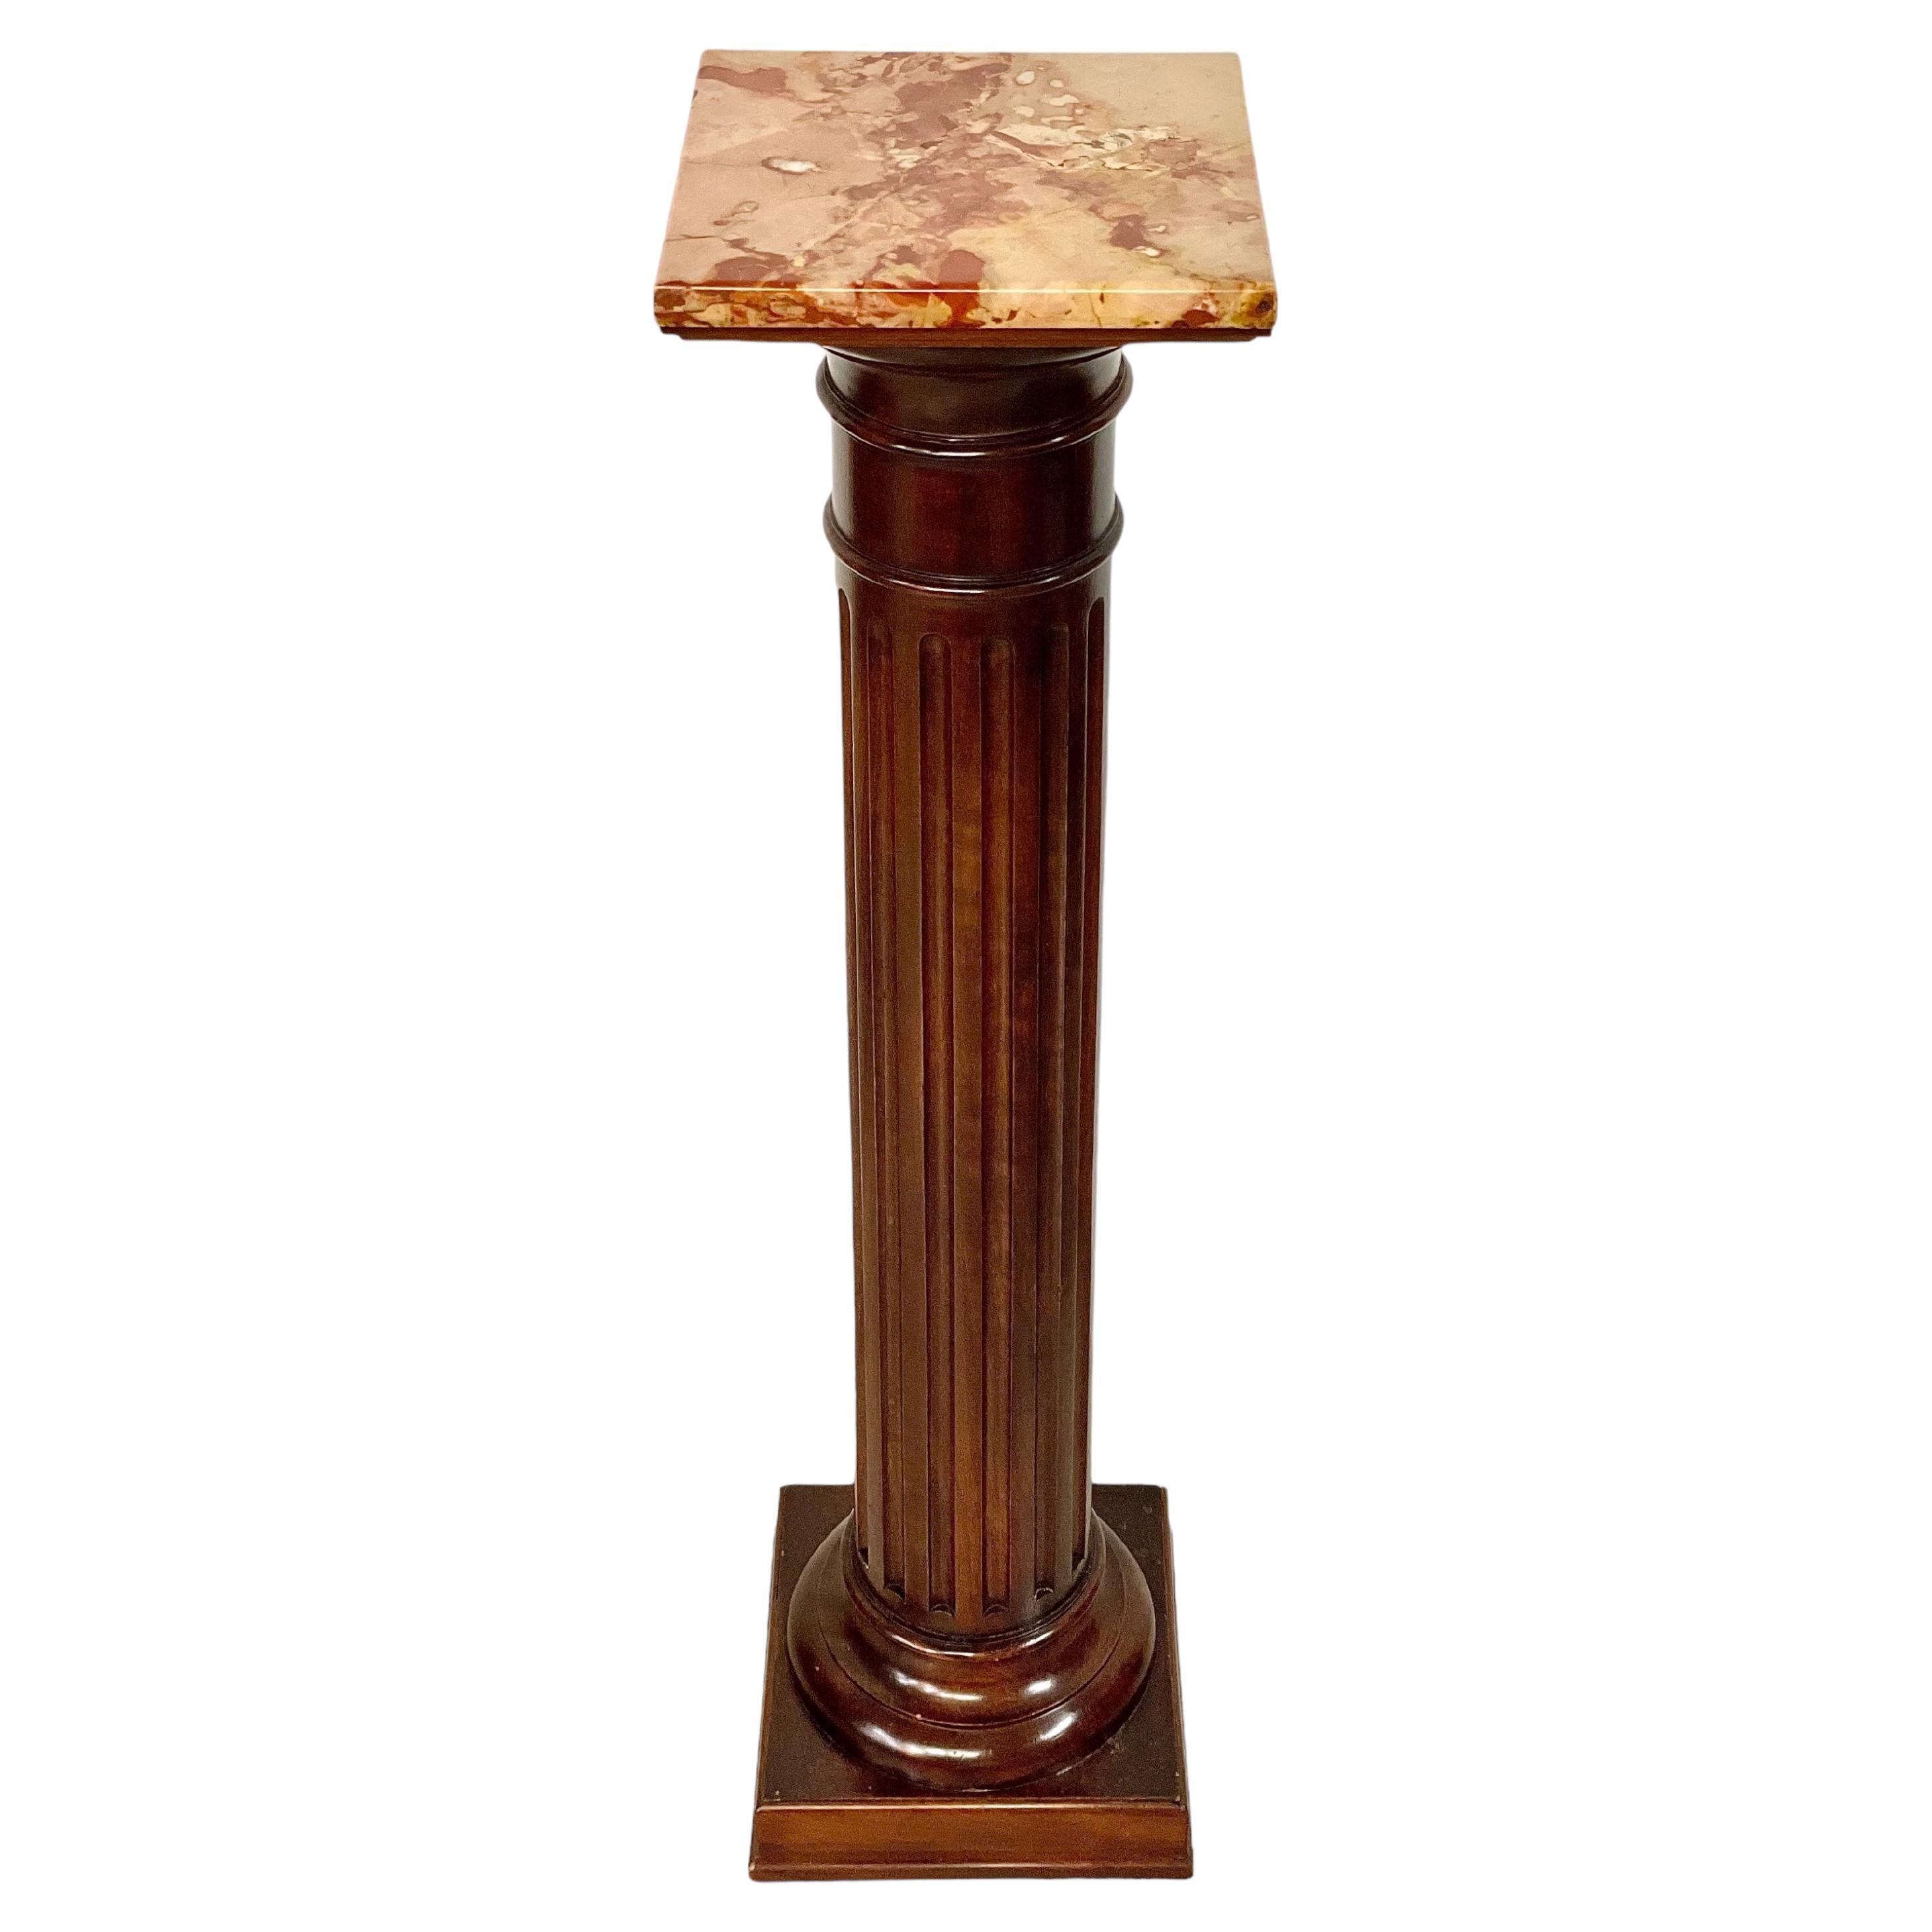 Louis XVI Column Pedestal with a Red Veined Marble Top